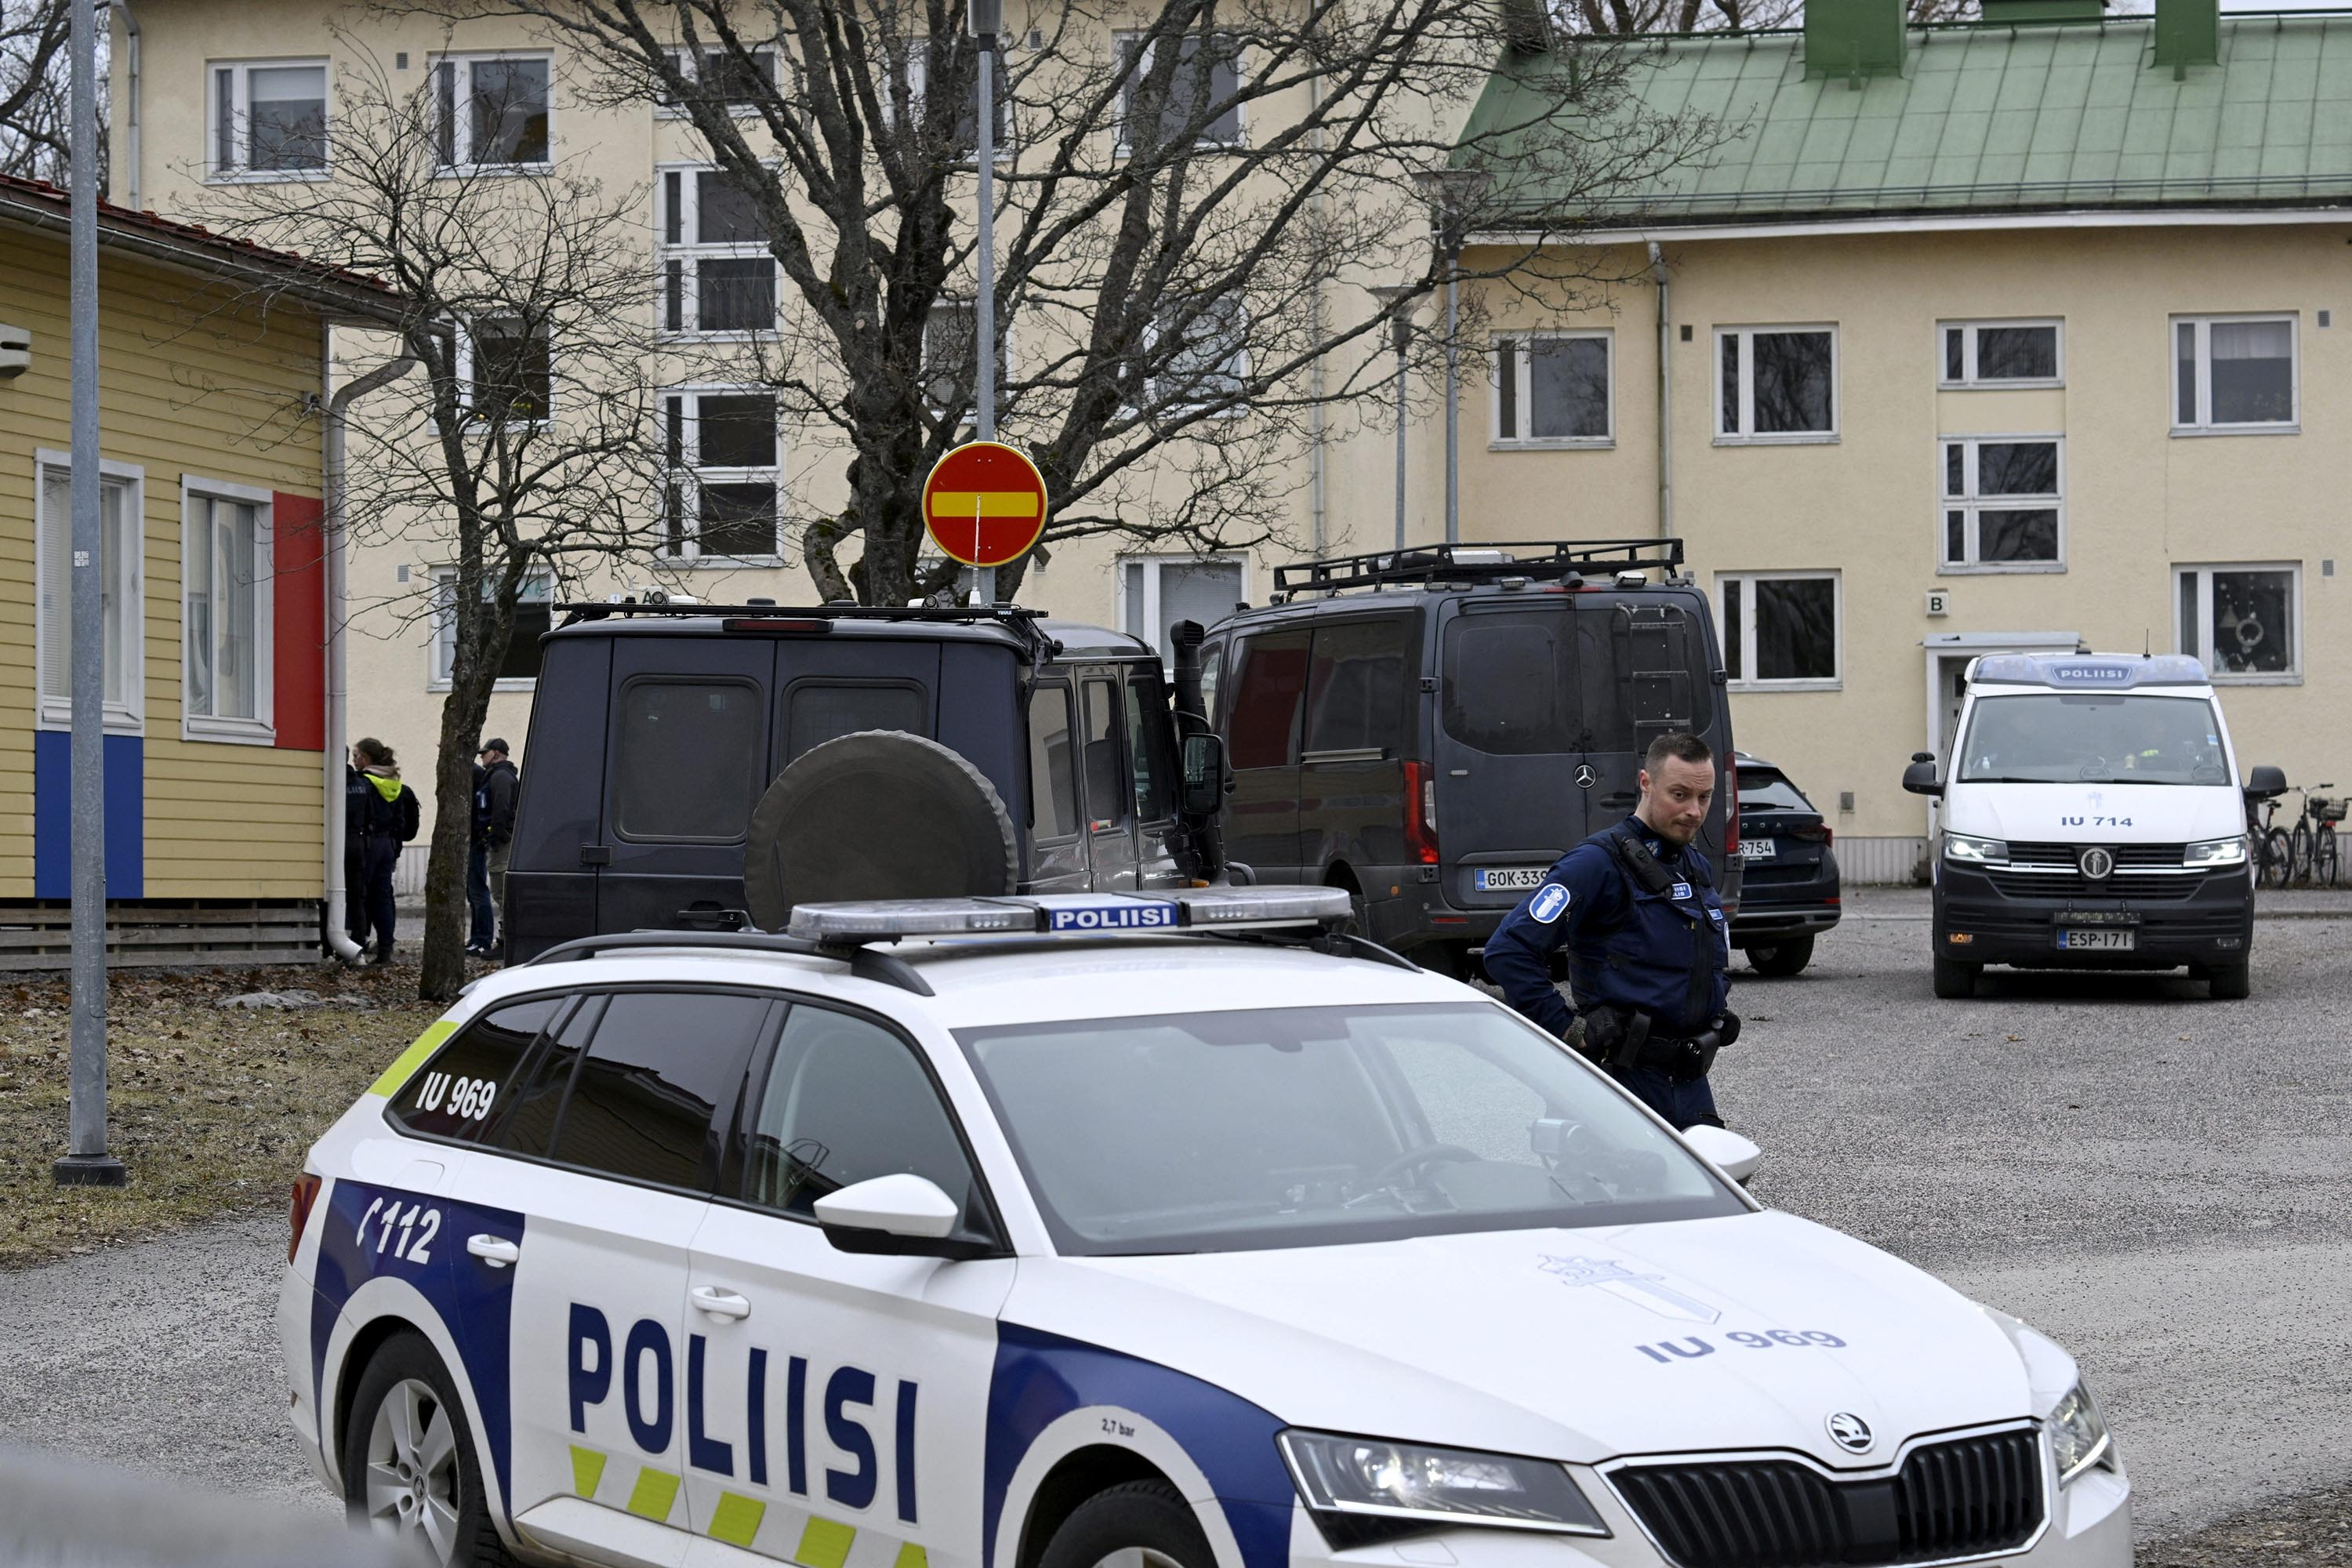 Finland school shooting: One child killed, two injured as 12-year-old suspect detained | CNN